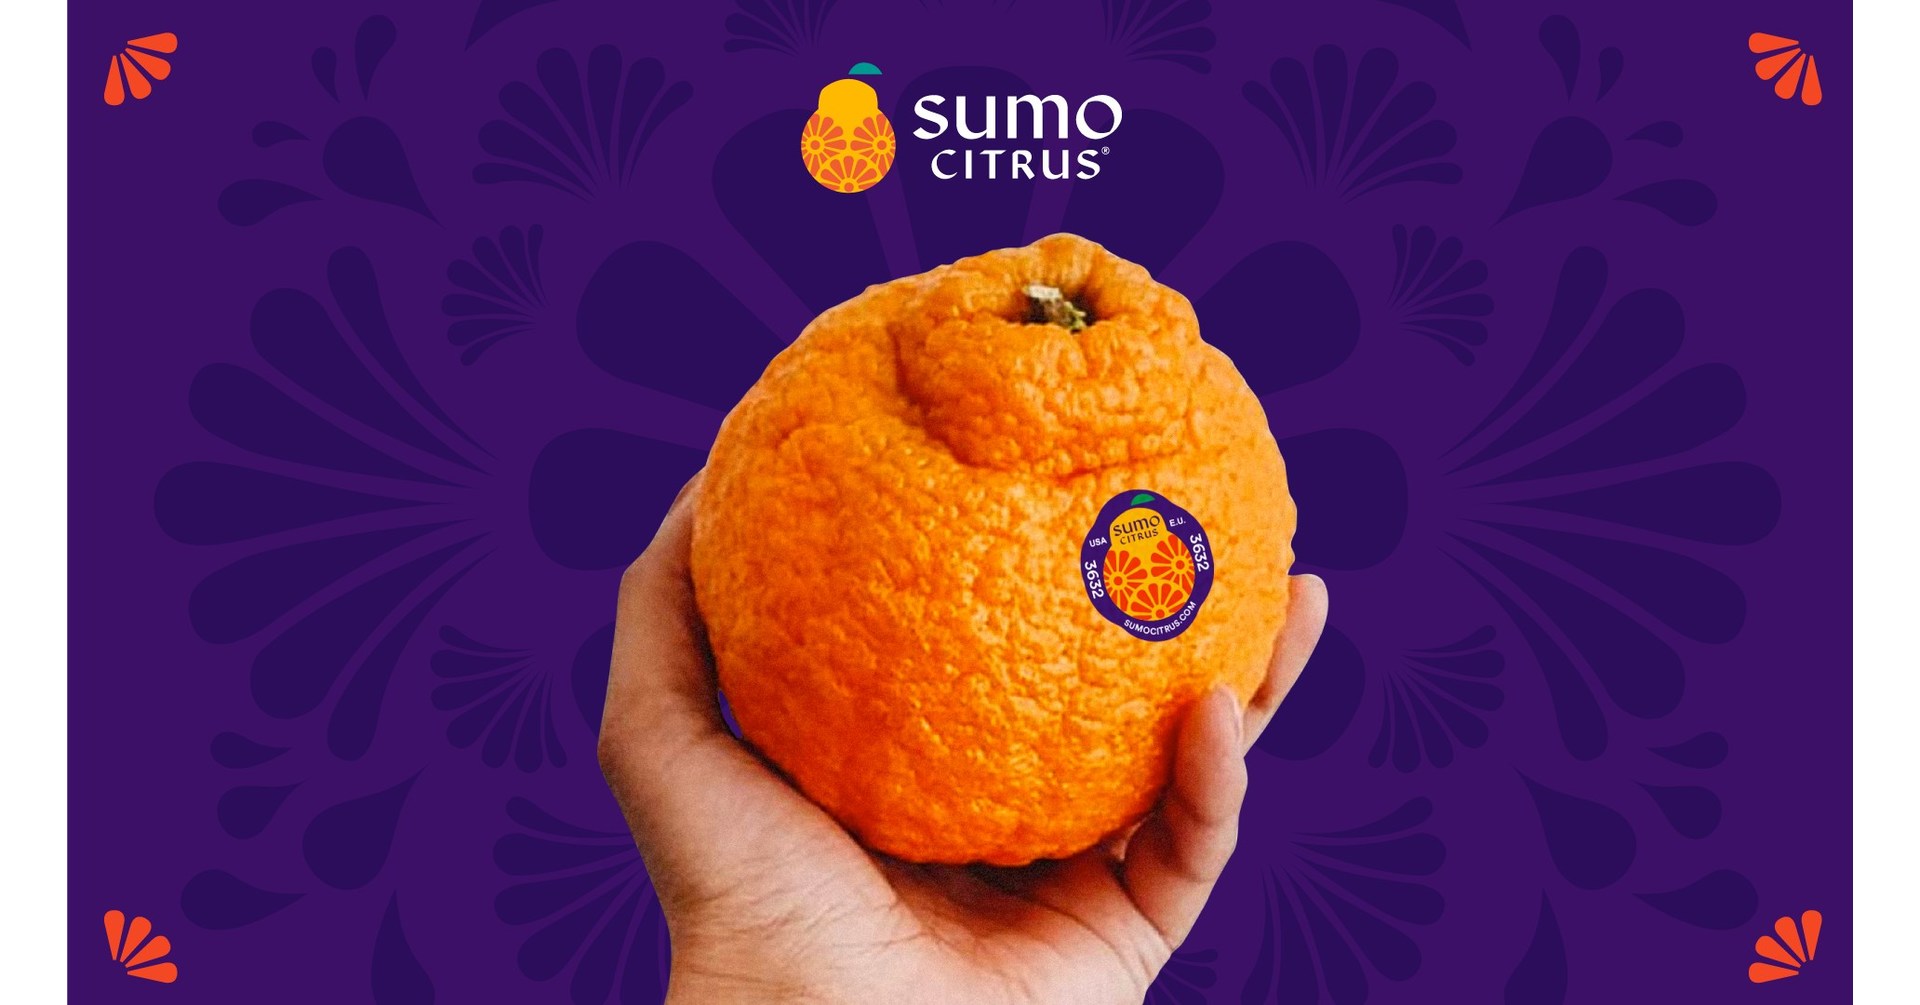 The Hype Is Real - Sumo Citrus®, The World's Most Loved Fruit Returns To  Stores January 2021